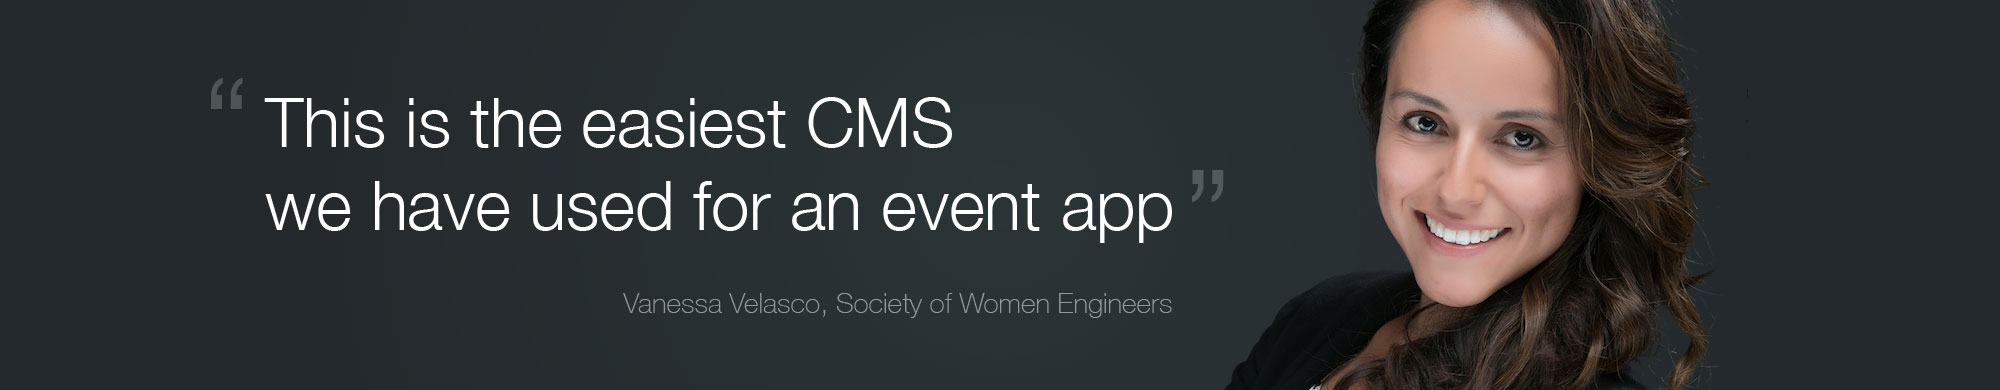 Best CMS for event app